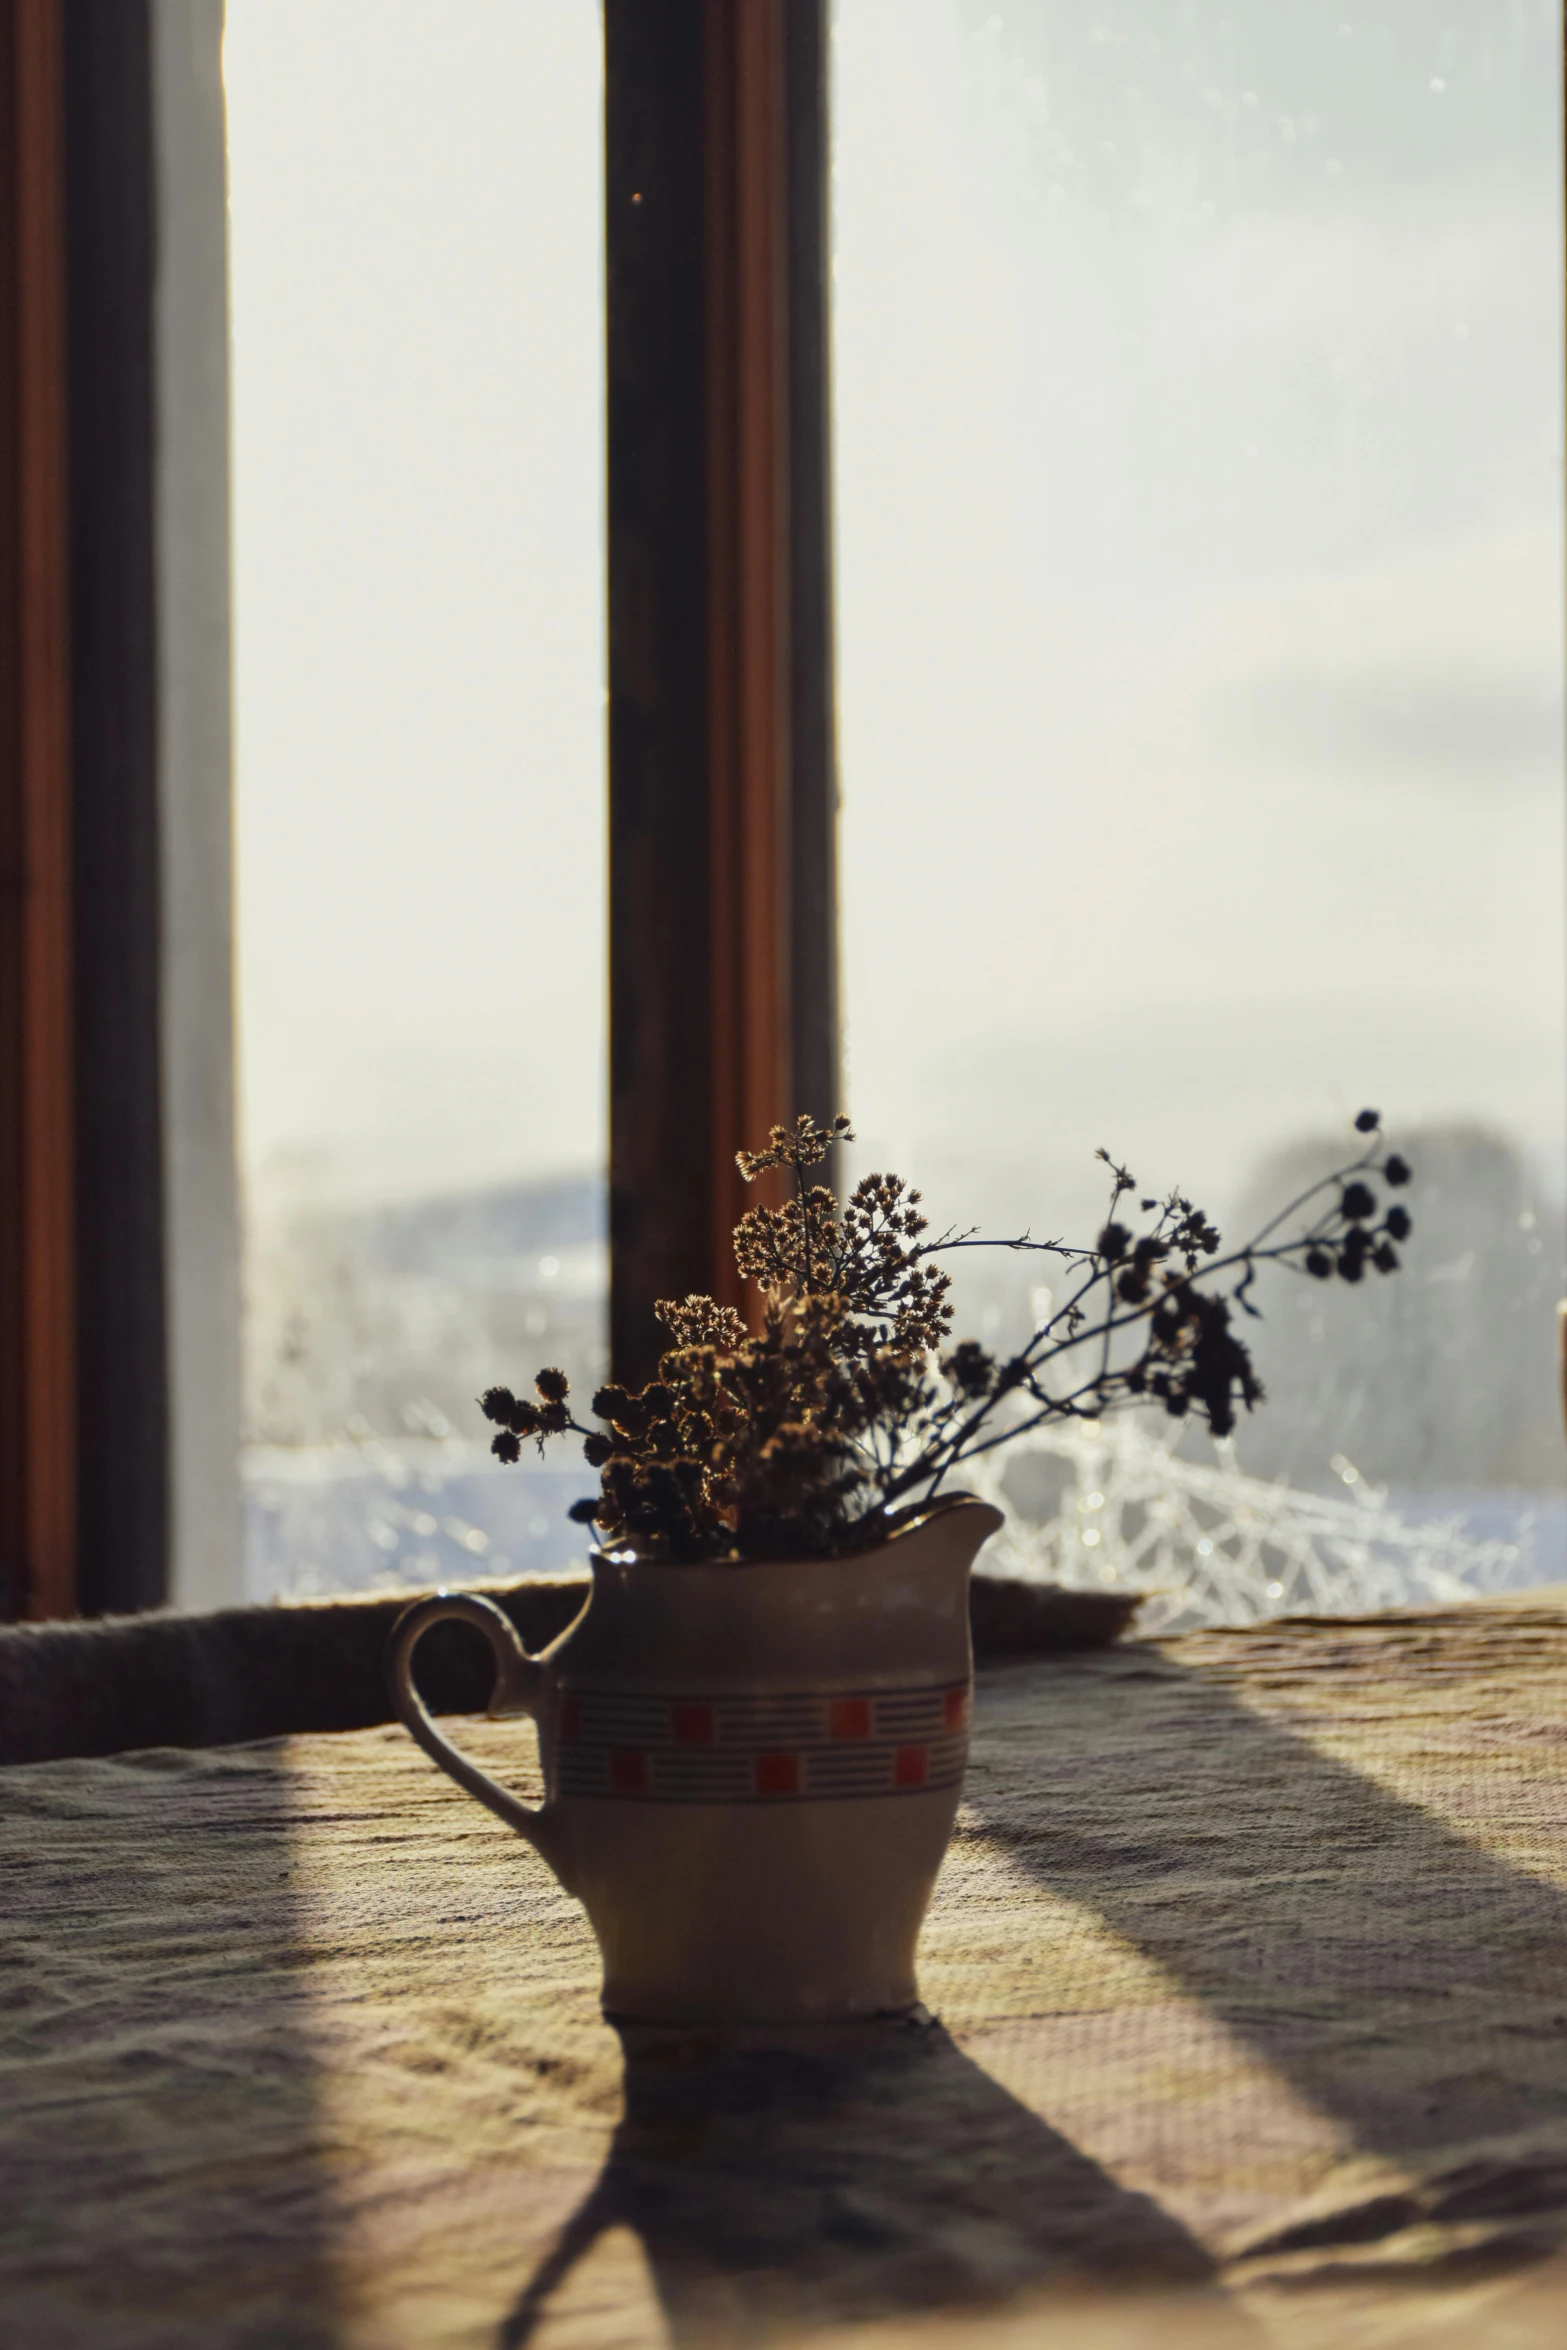 flower in small cup with mountains in background